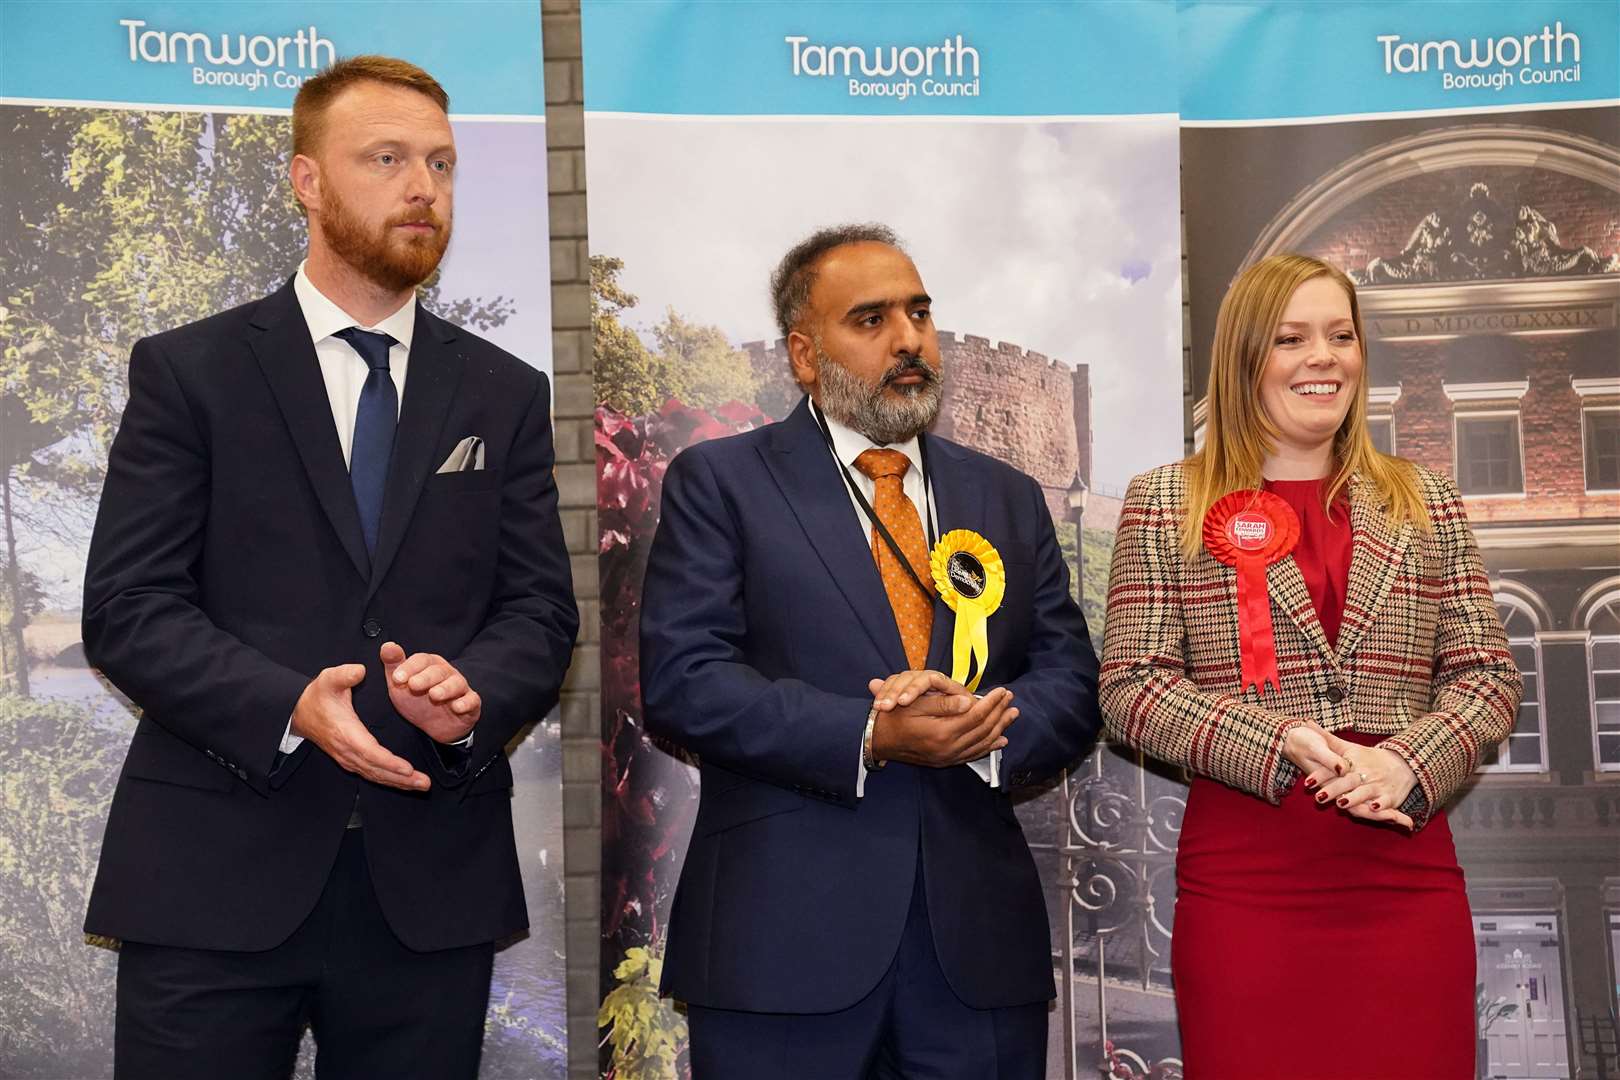 Sarah Edwards is the new MP for Tamworth following Thursday’s by-election (Jacob King/PA)